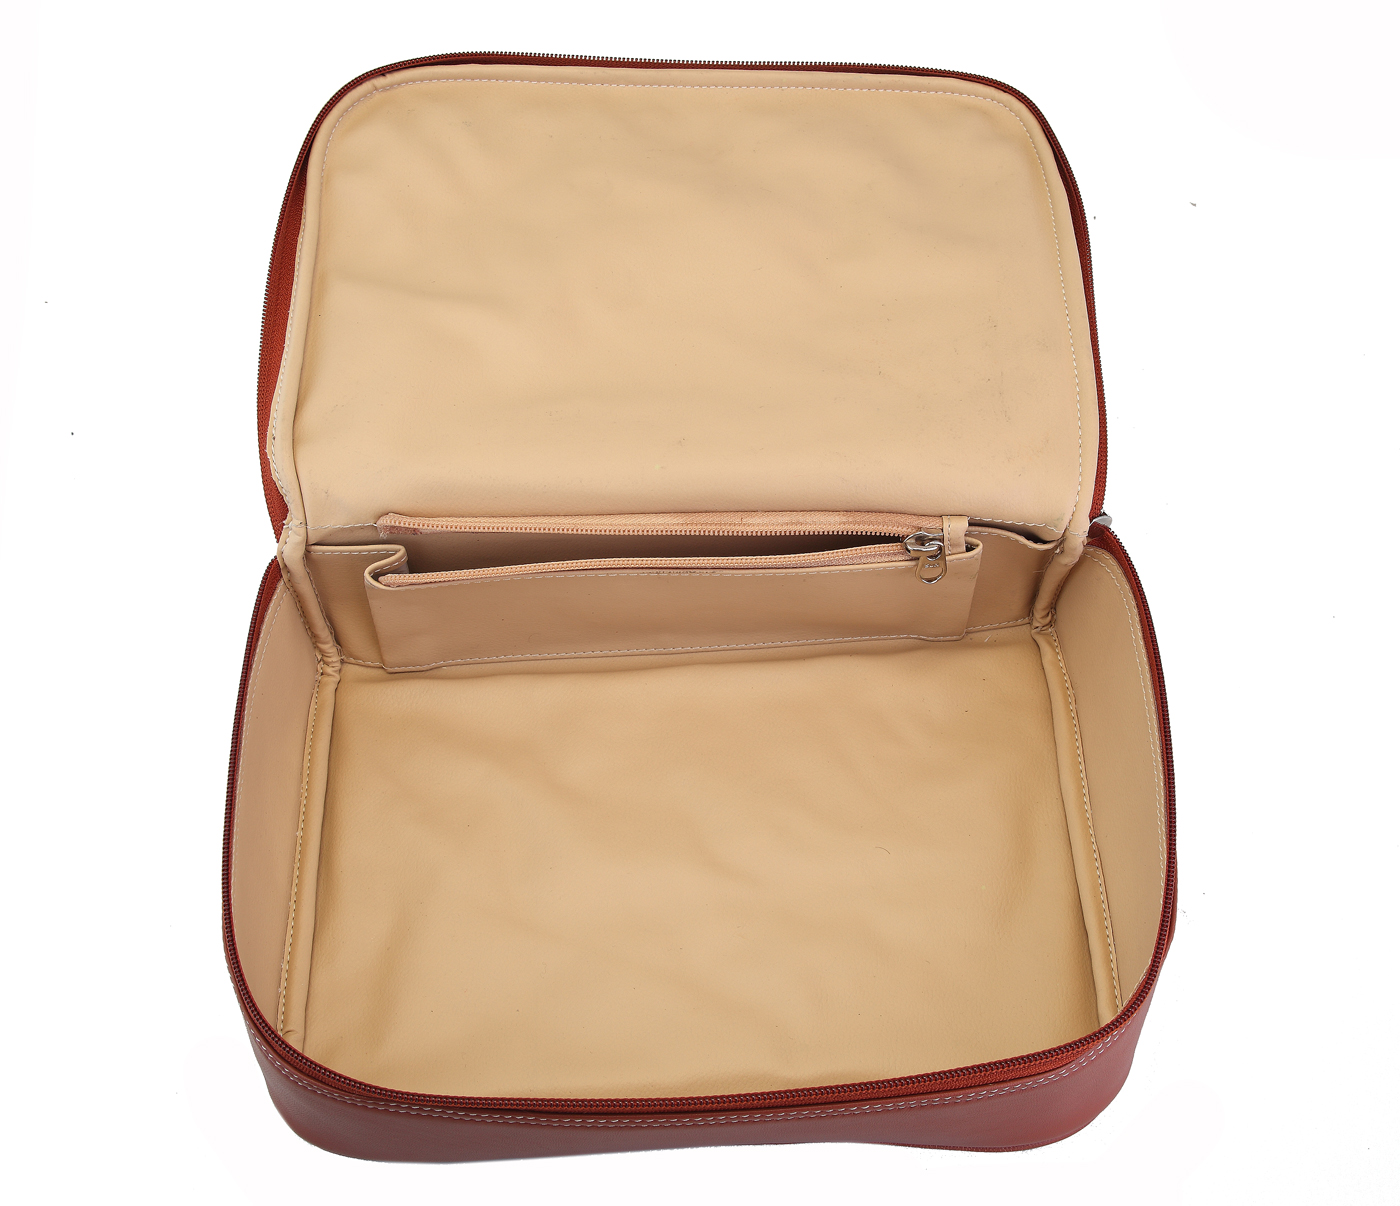 SC5--Unisex Wash & Toiletry travel Bag in Genuine Leather - Tan